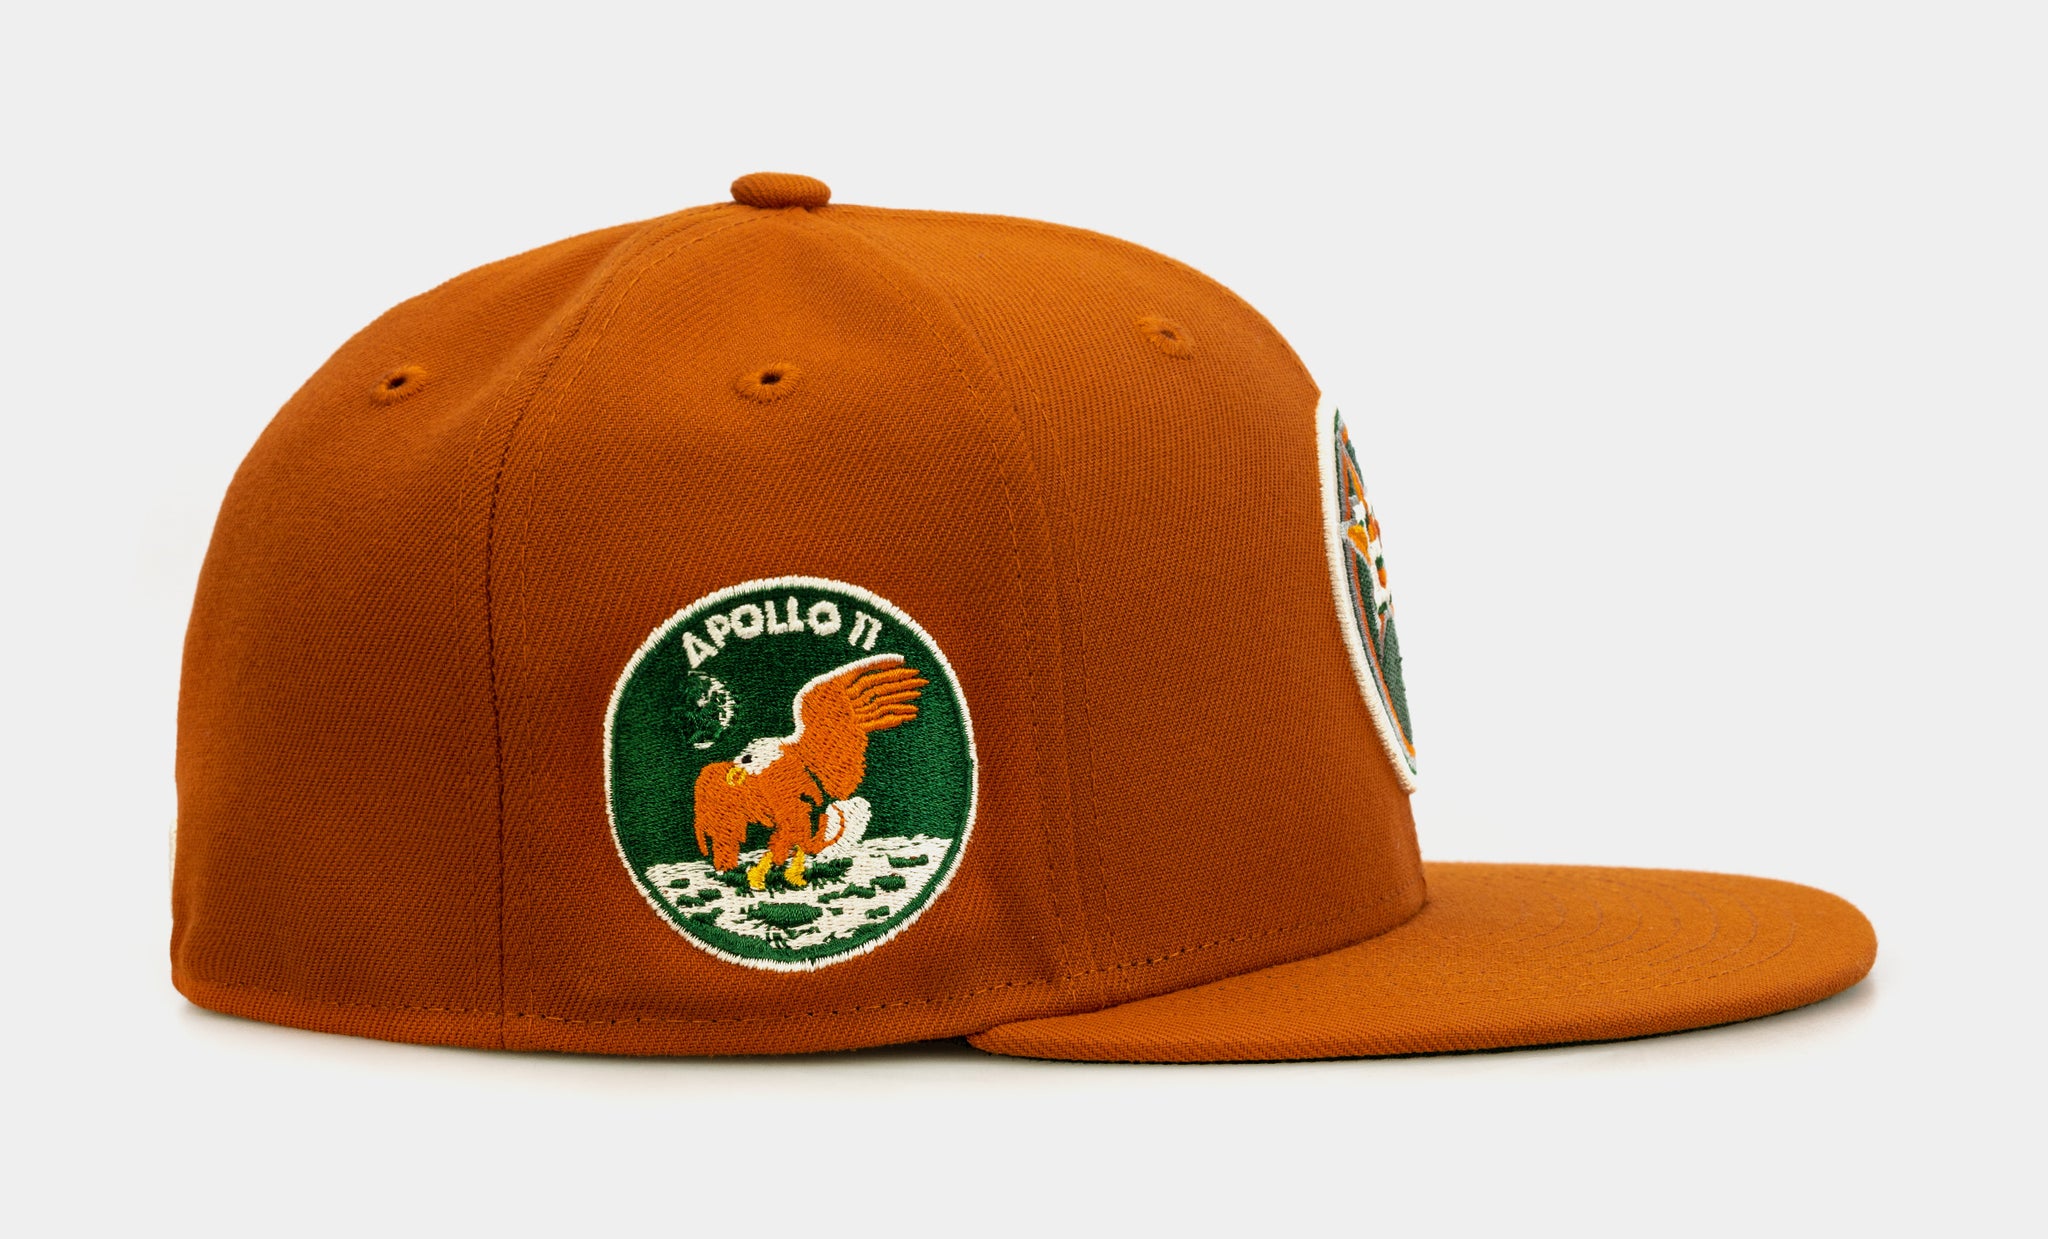 New Era Houston Astros Jersey Fit Throwback Edition 59Fifty Fitted Cap, EXCLUSIVE CAPS, CAPS